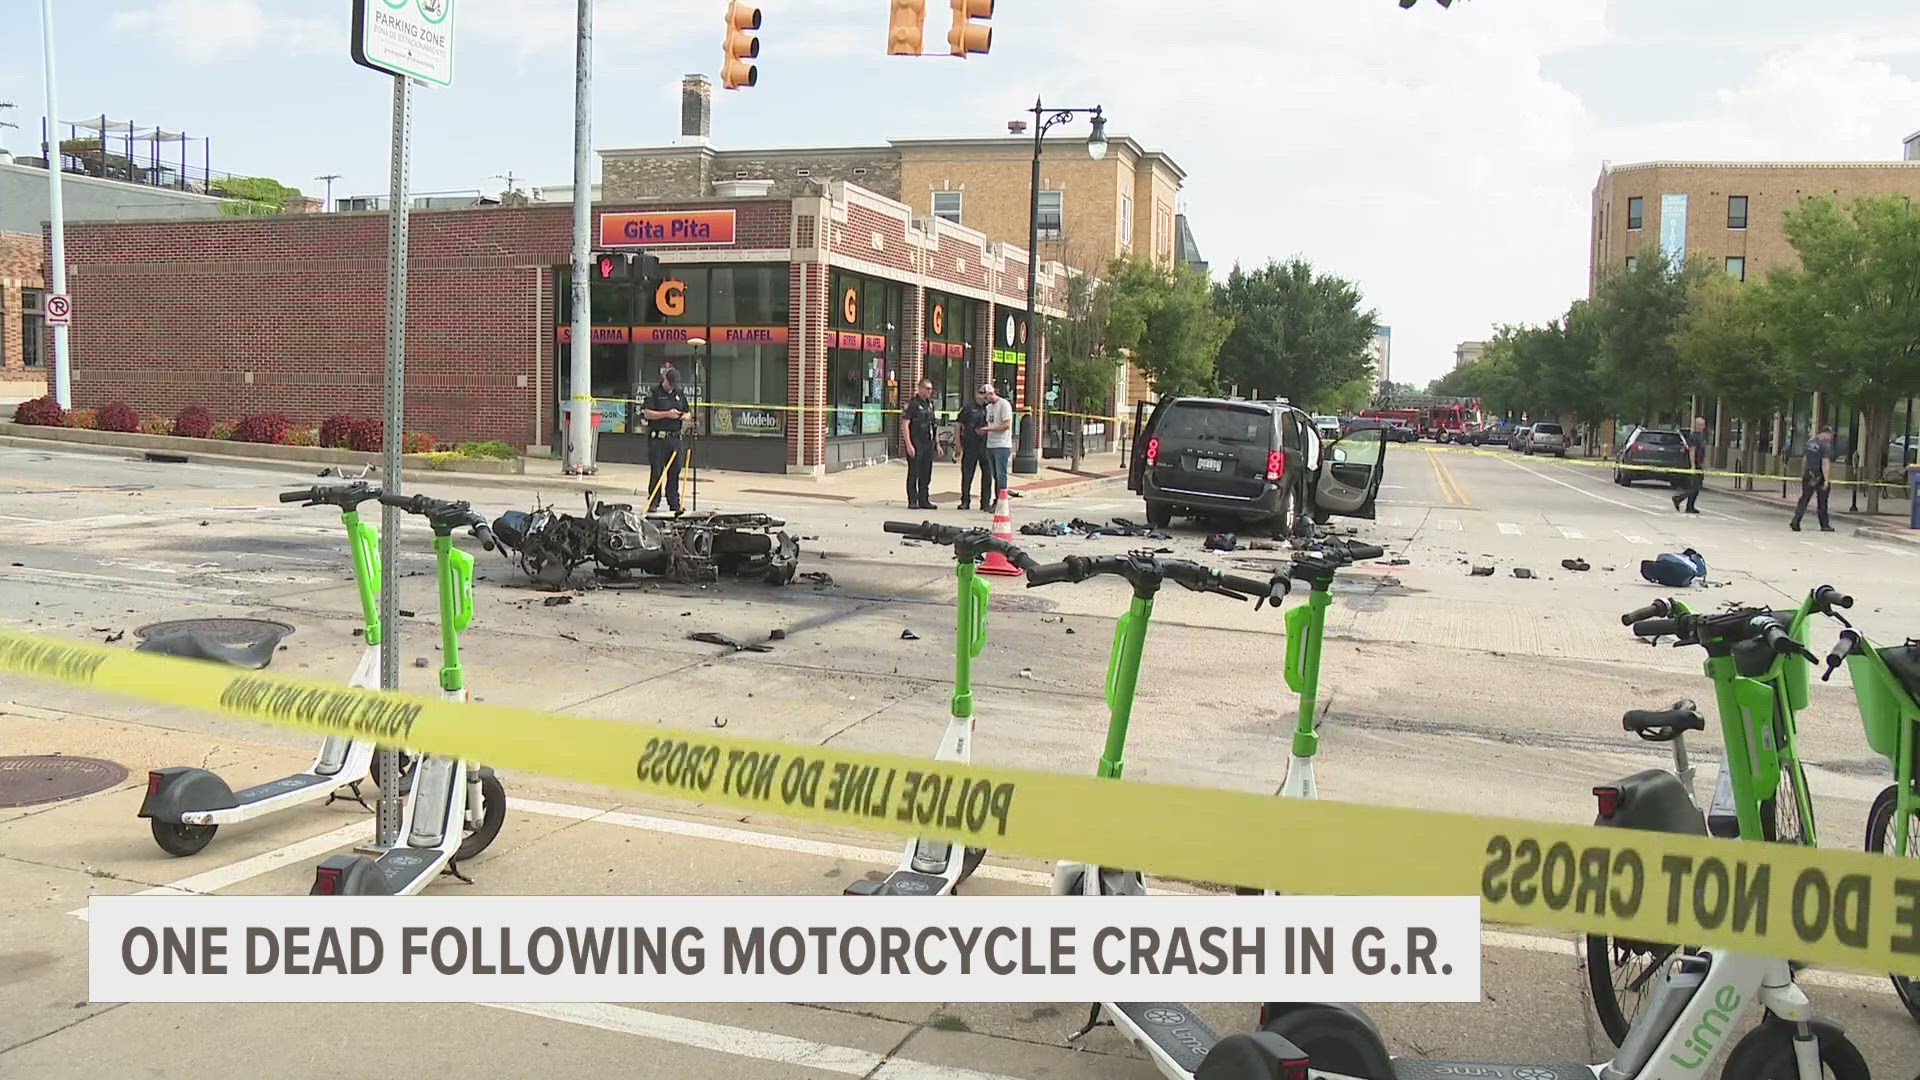 Five people were hospitalized and 1 person is dead following Tuesday's crash. Multiple motorcycles and a van was involved.